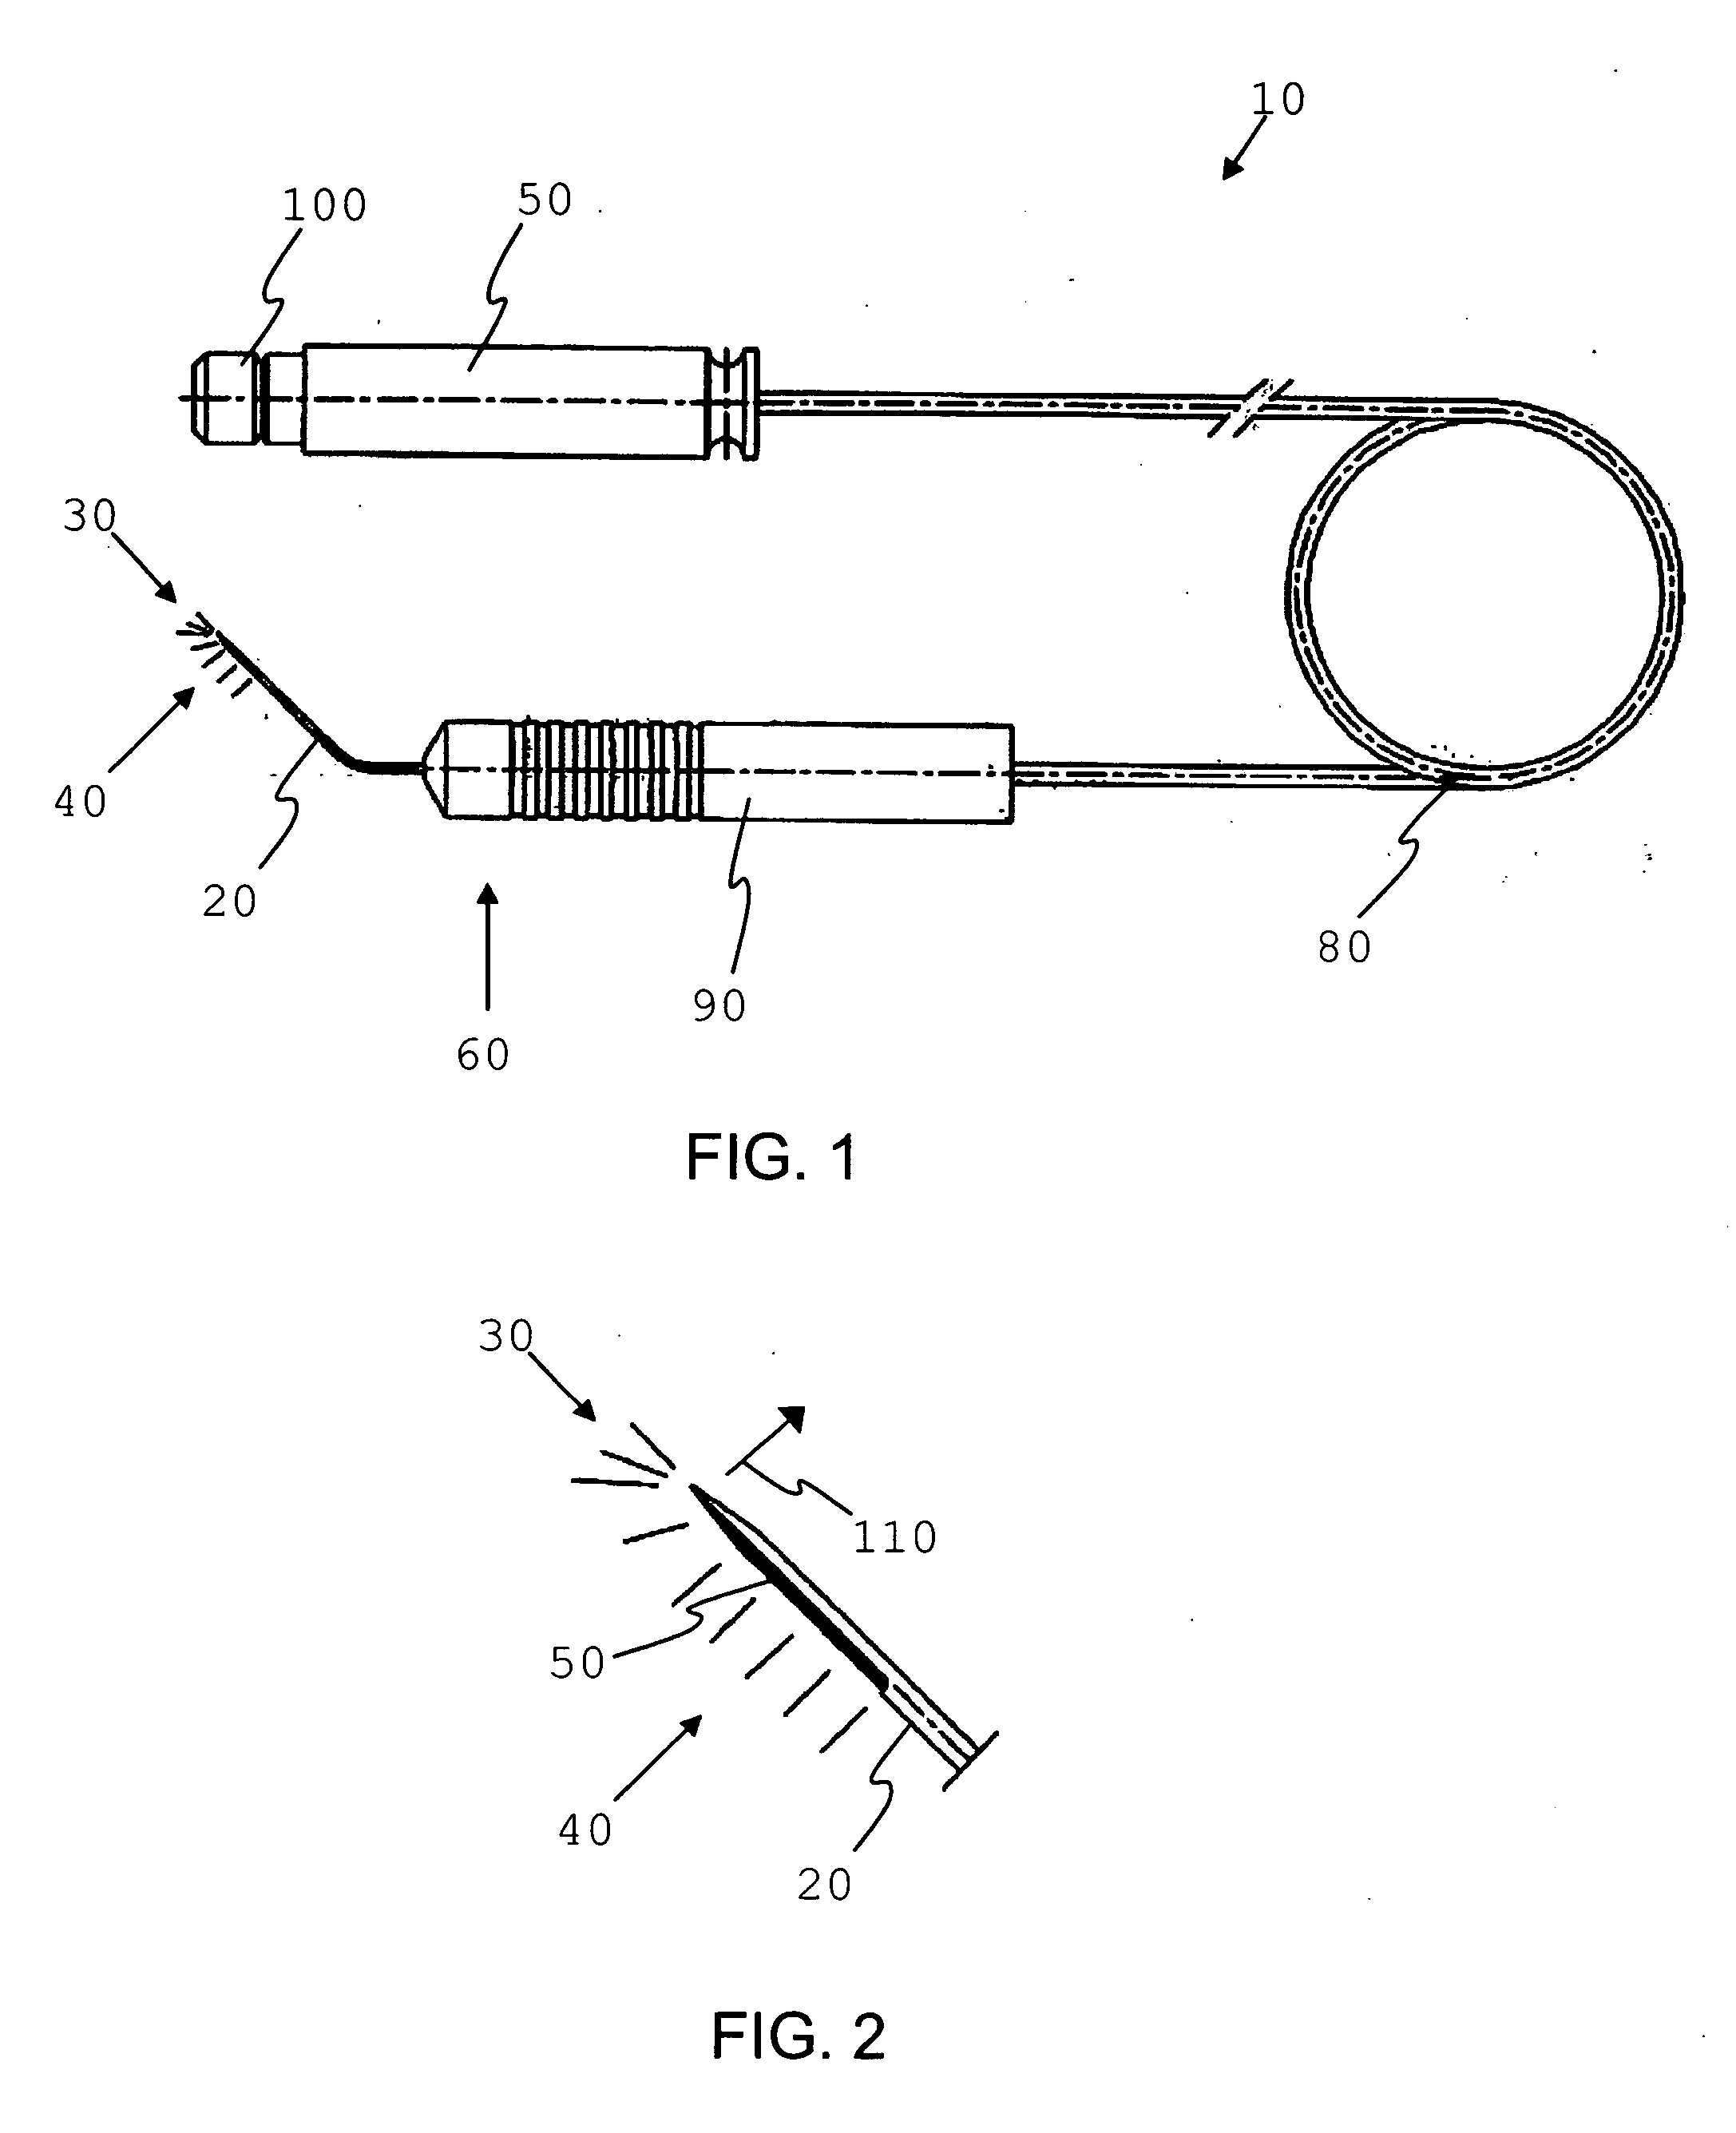 Shielded intraocular probe for improved illumination or therapeutic application of light